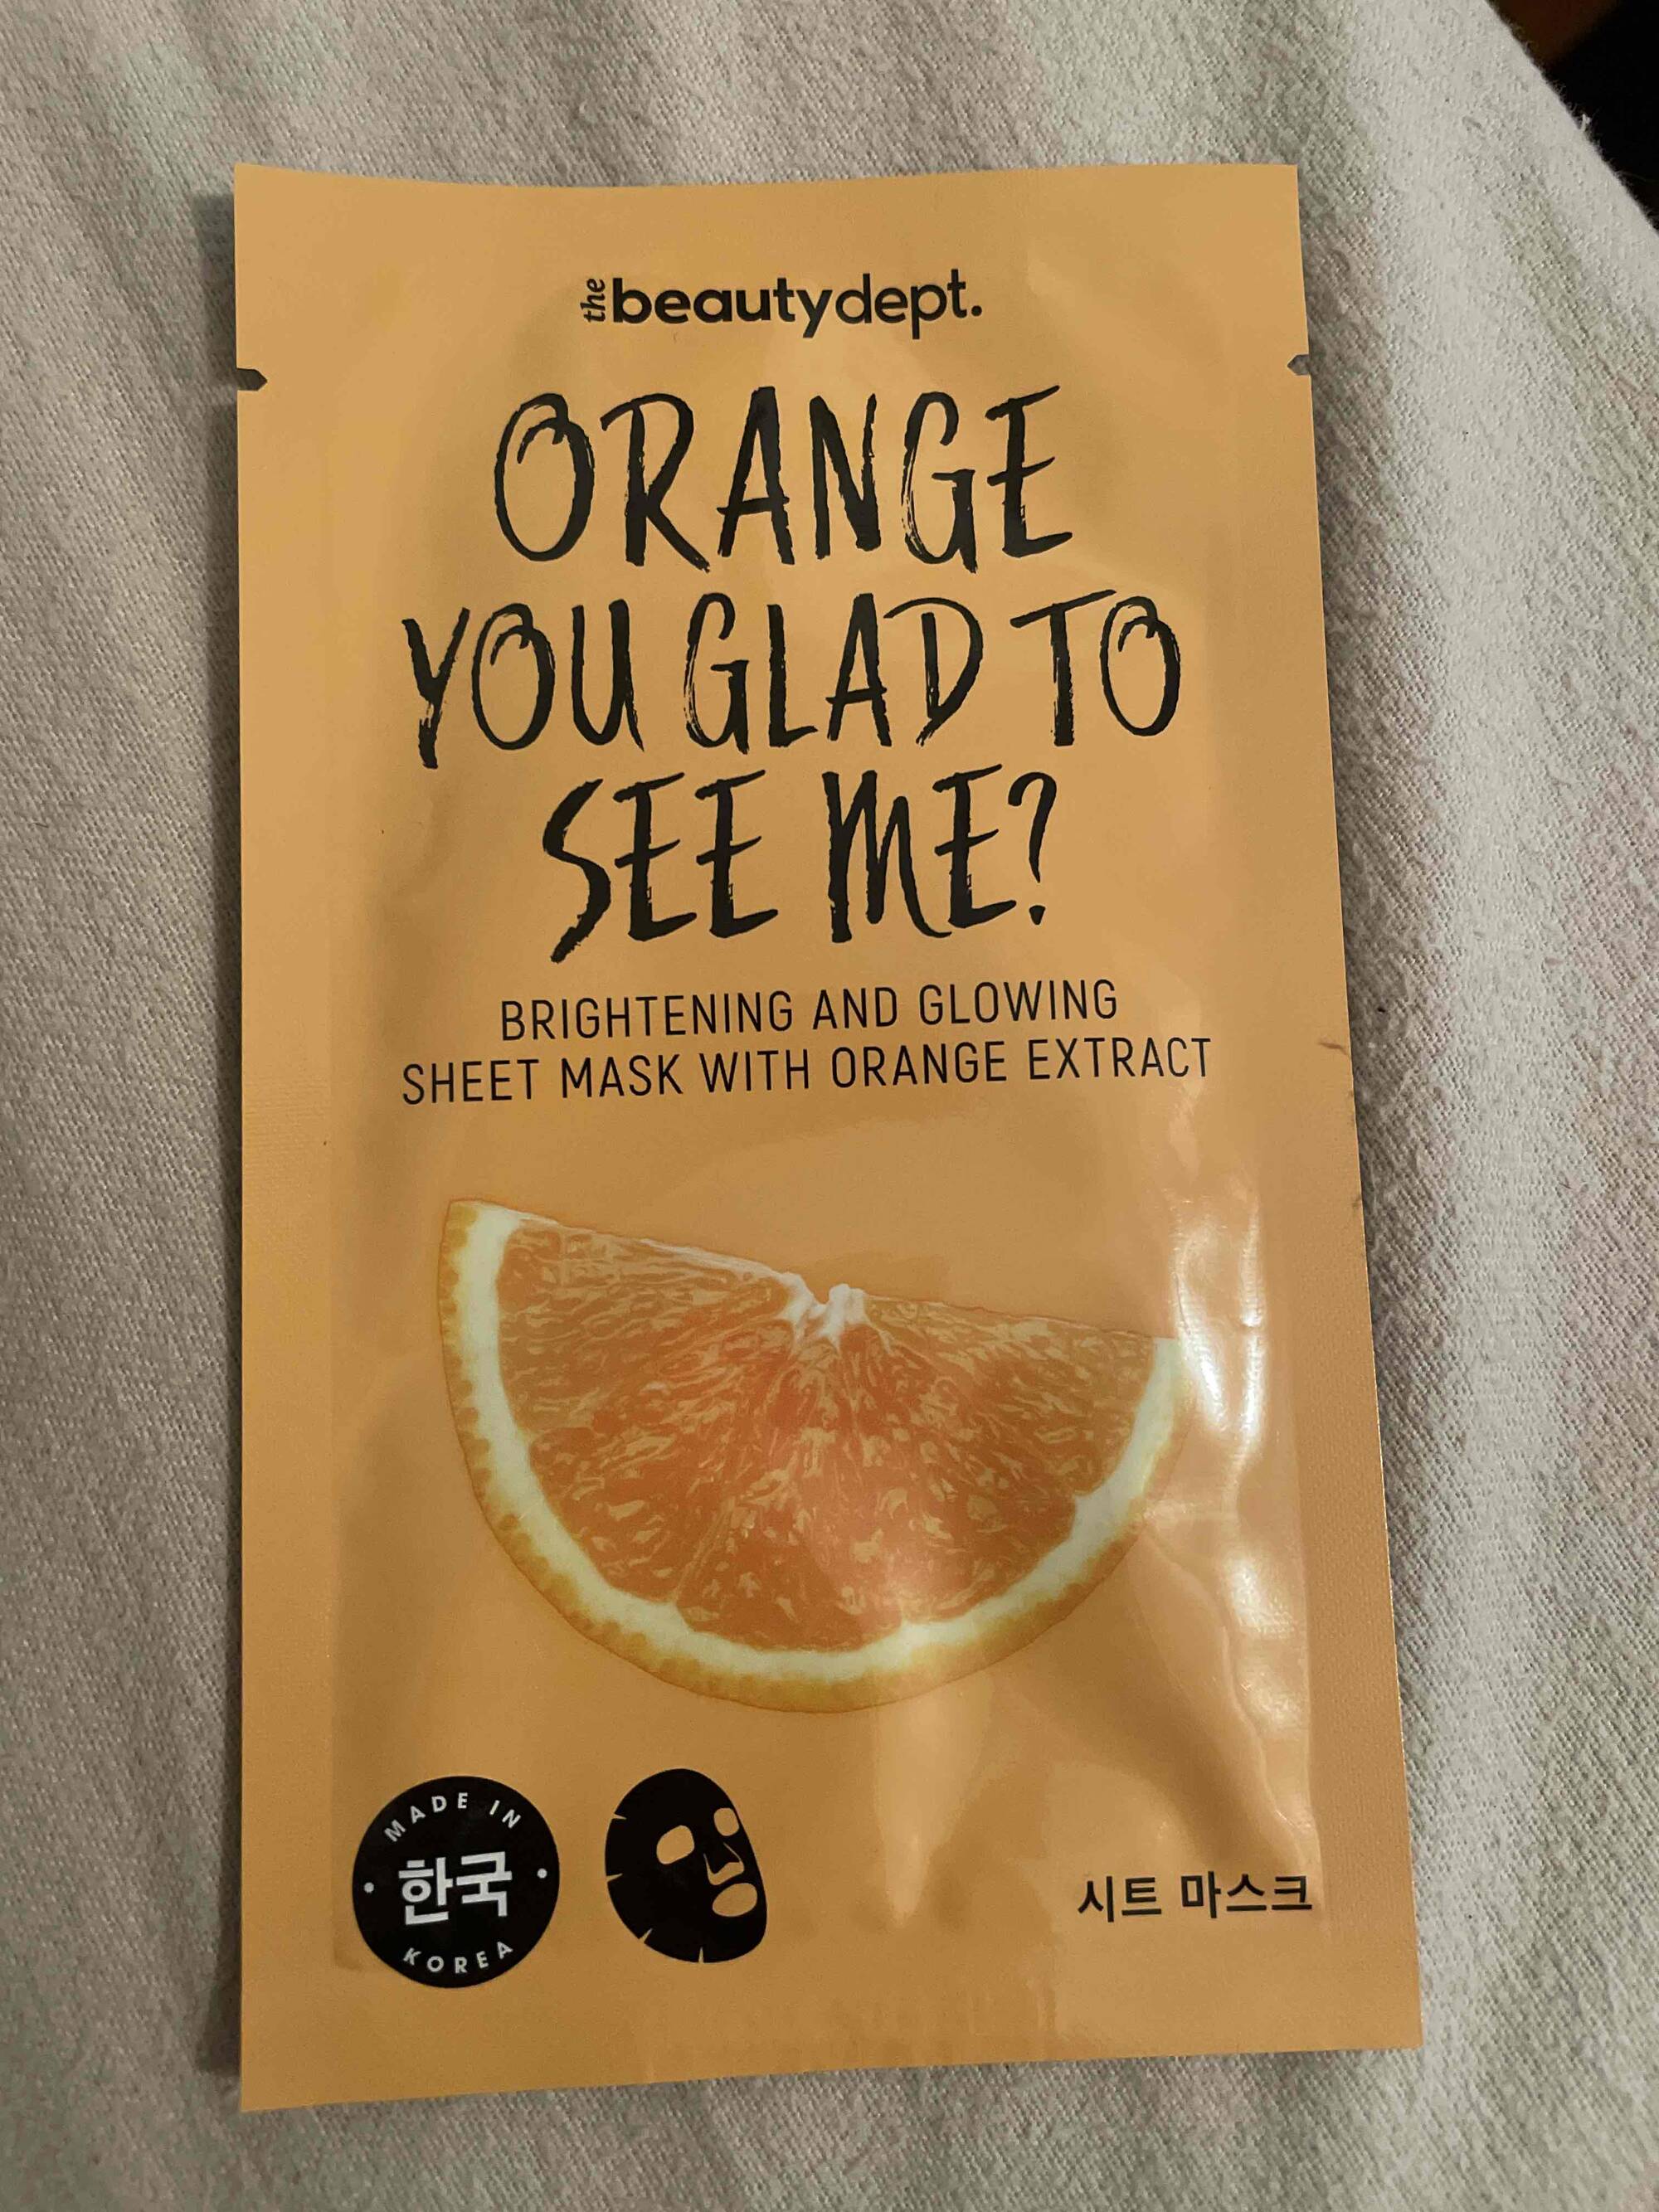 THE BEAUTY DEPT - Sheet mask with orange extract